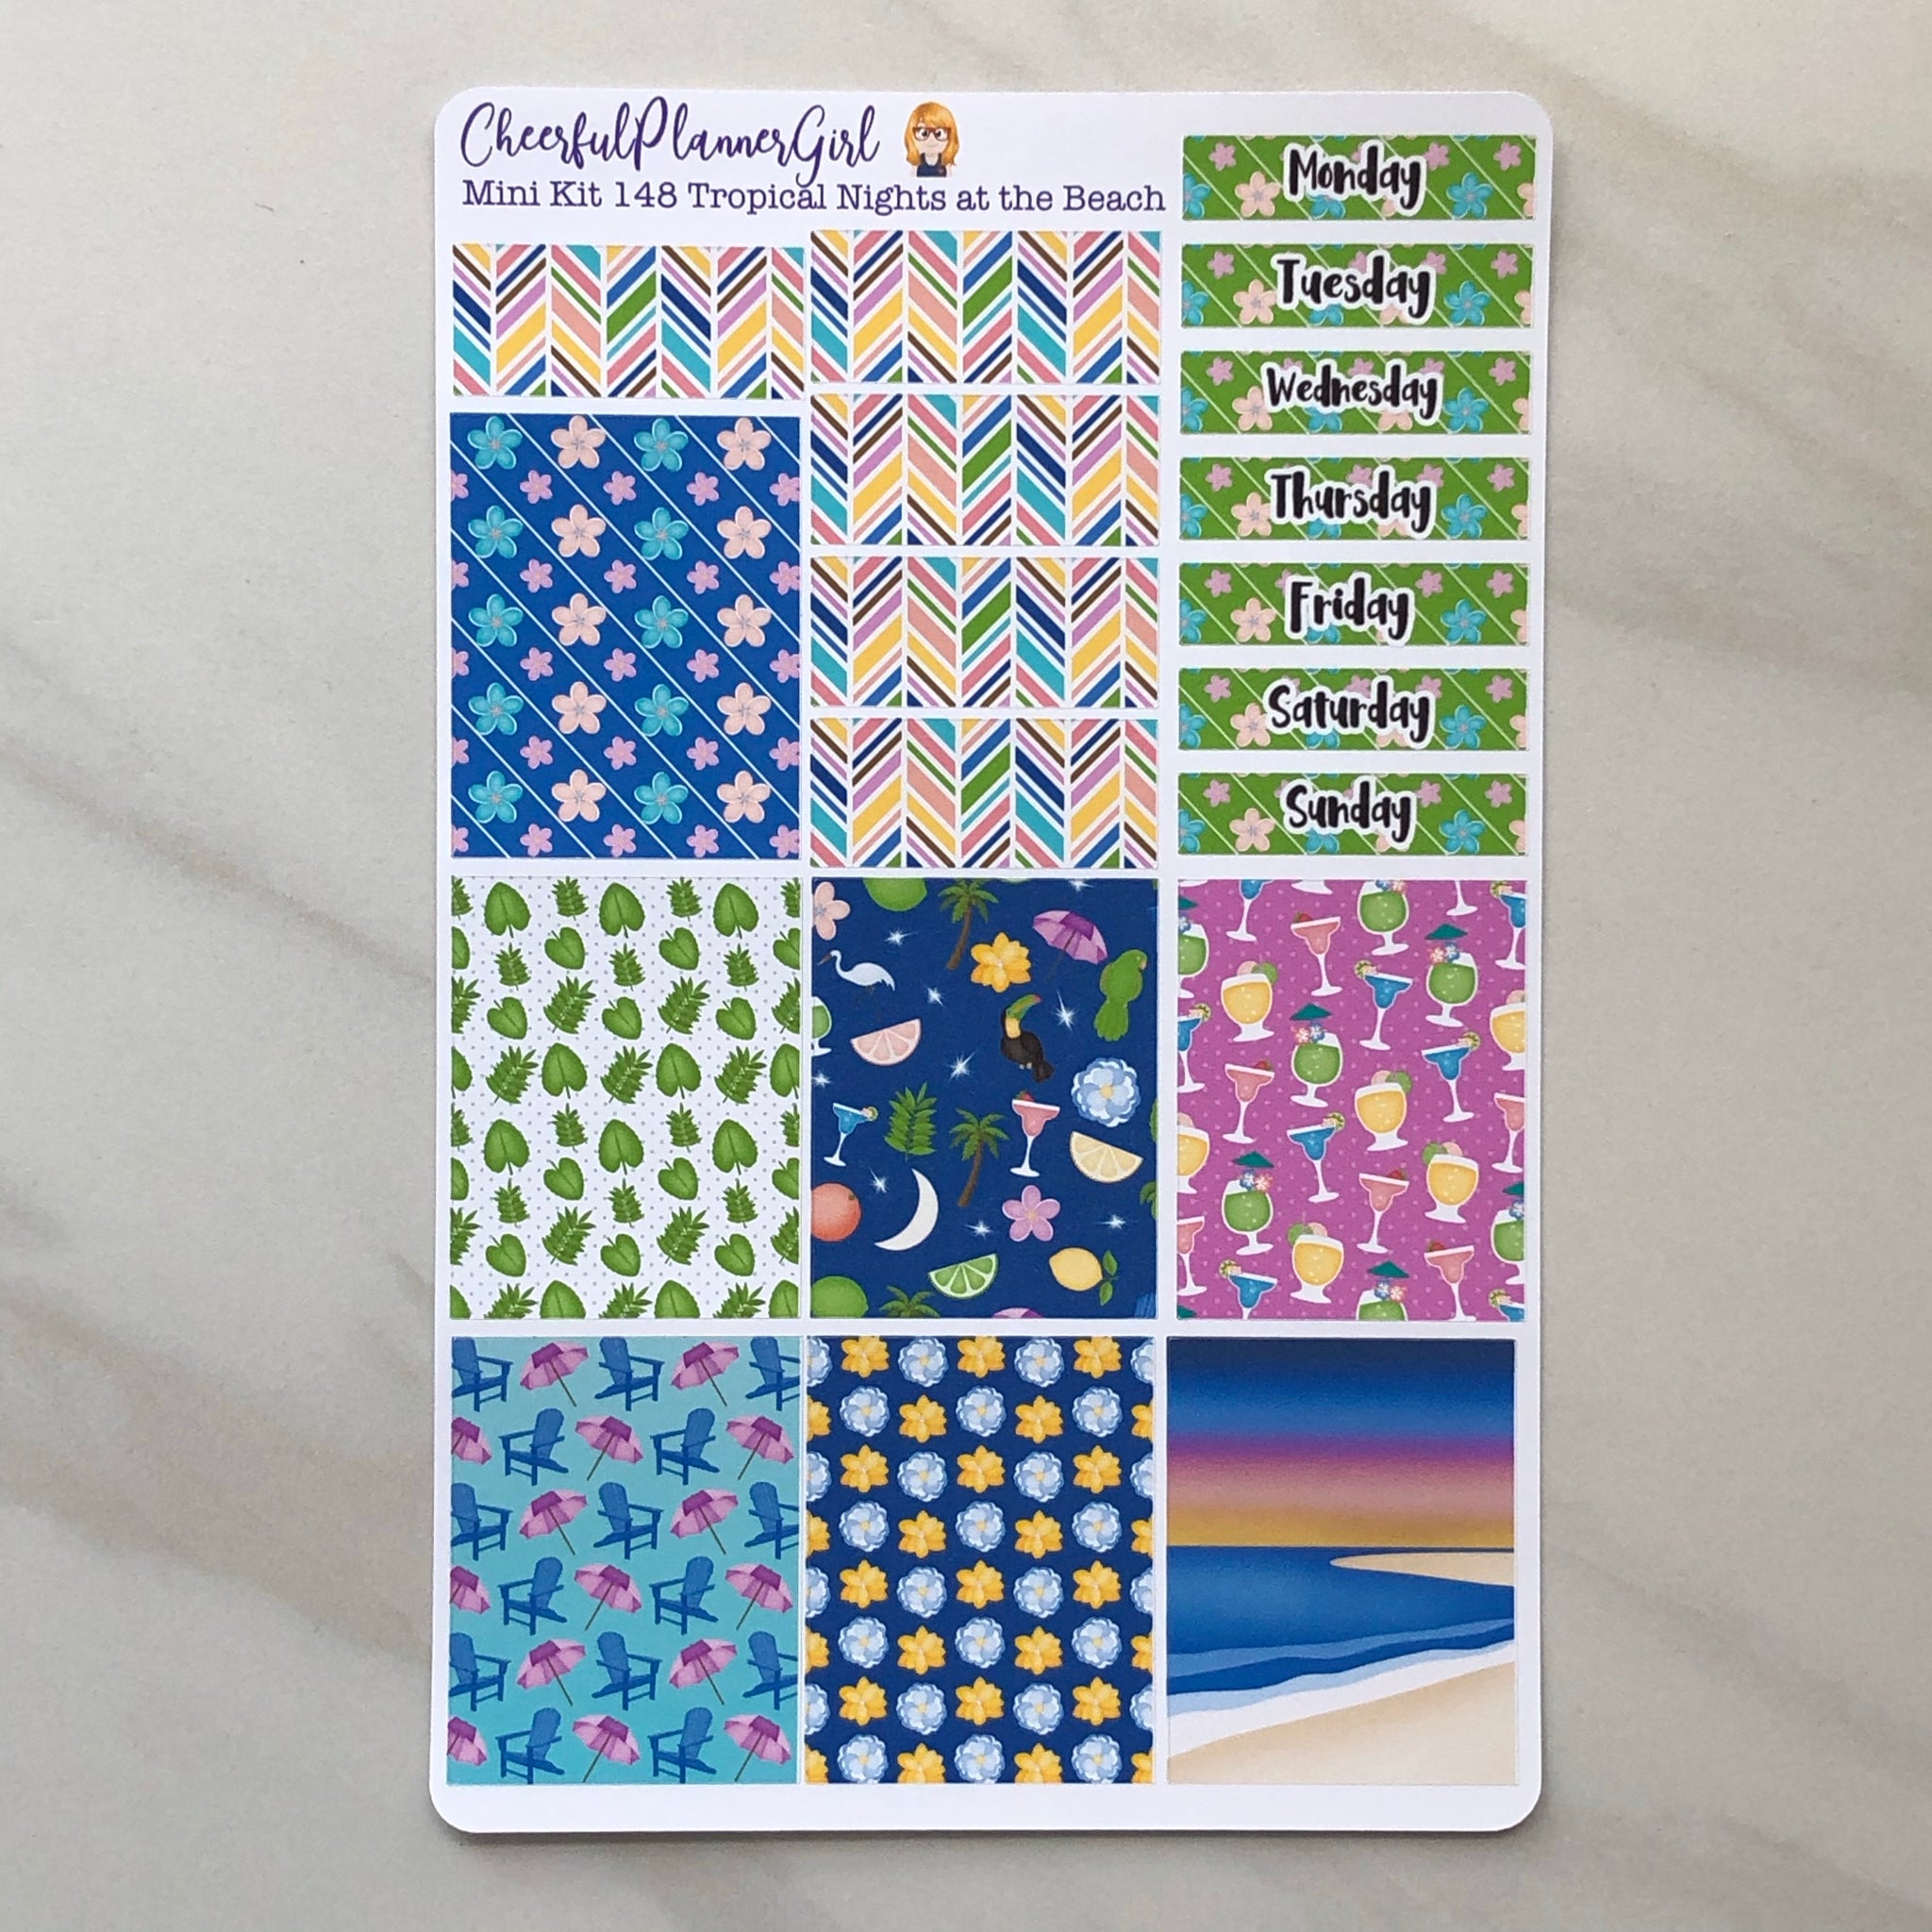 Tropical Nights at the Beach Mini Kit Weekly Layout Planner Stickers